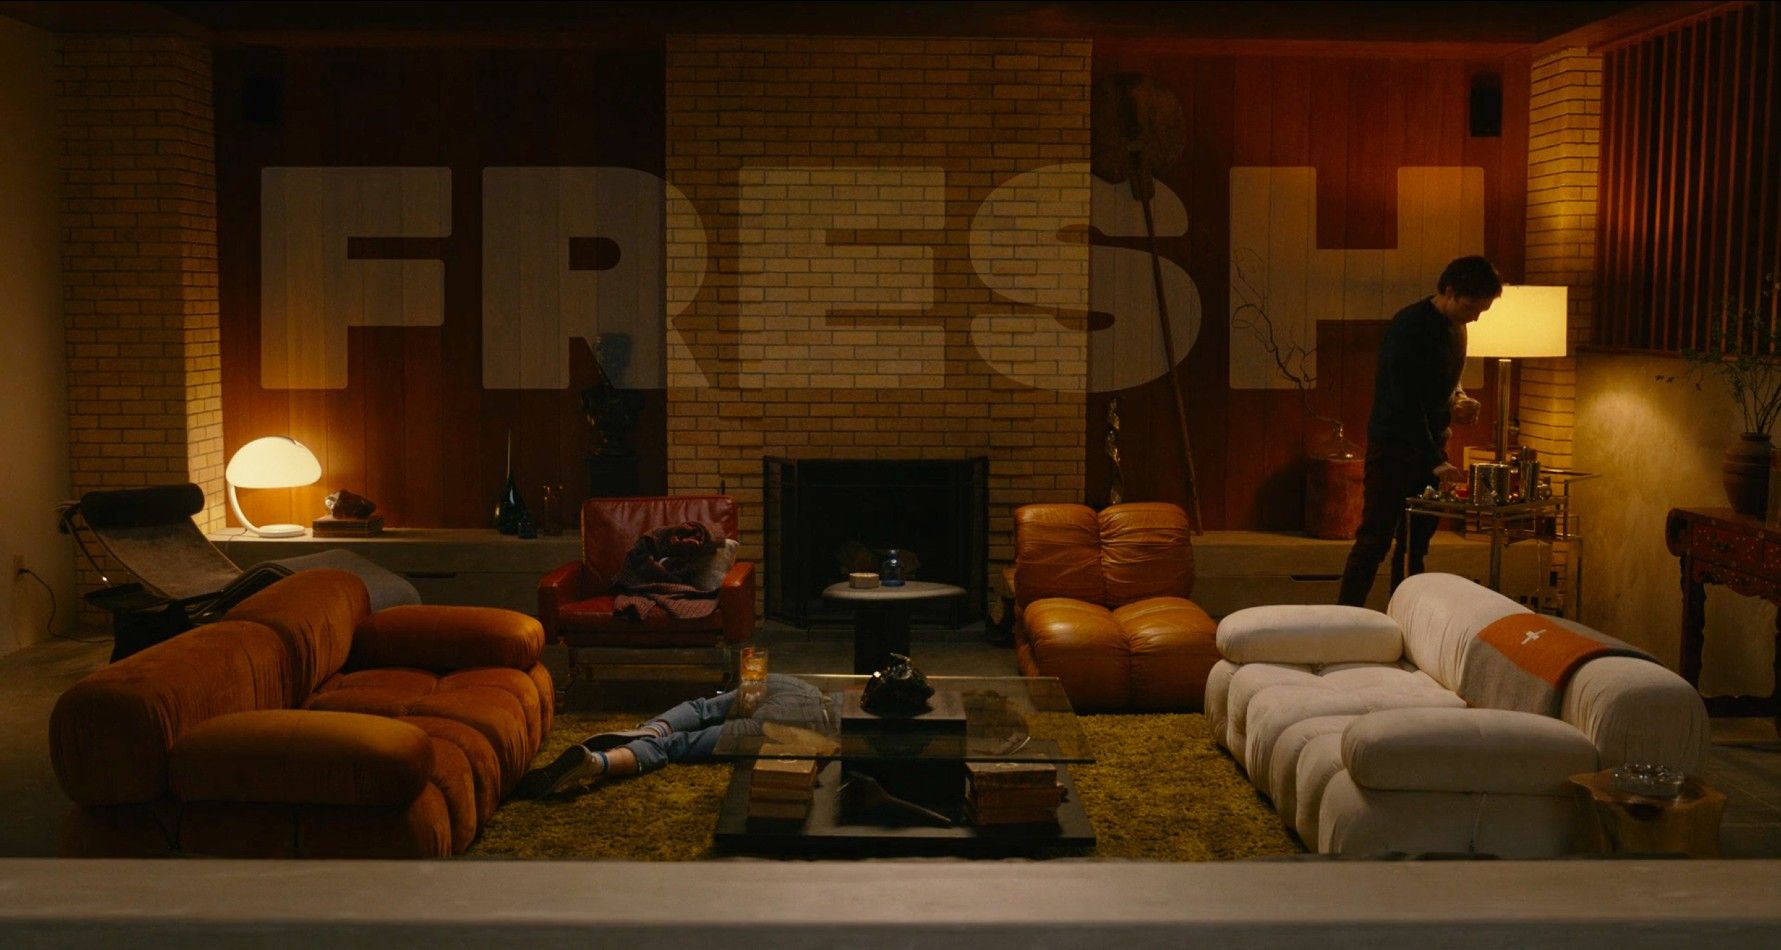 Fresh’s Opening Credits Twist Makes Cannibalism More Sick